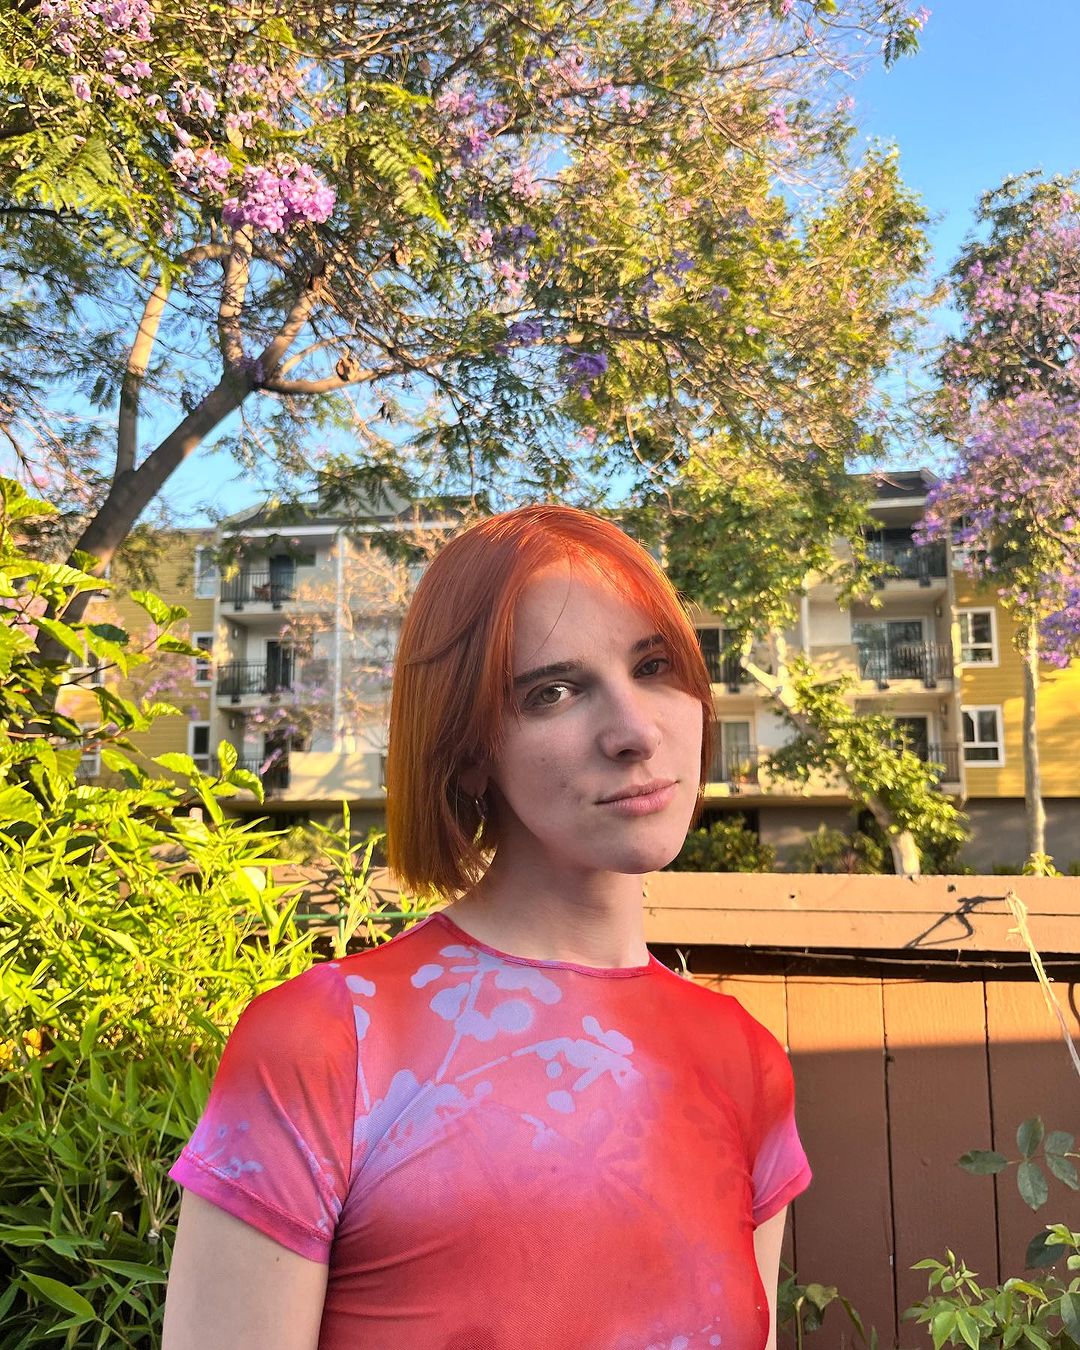 A woman, Hari Nef, with short red hair gazes at the camera surrounded by trees.